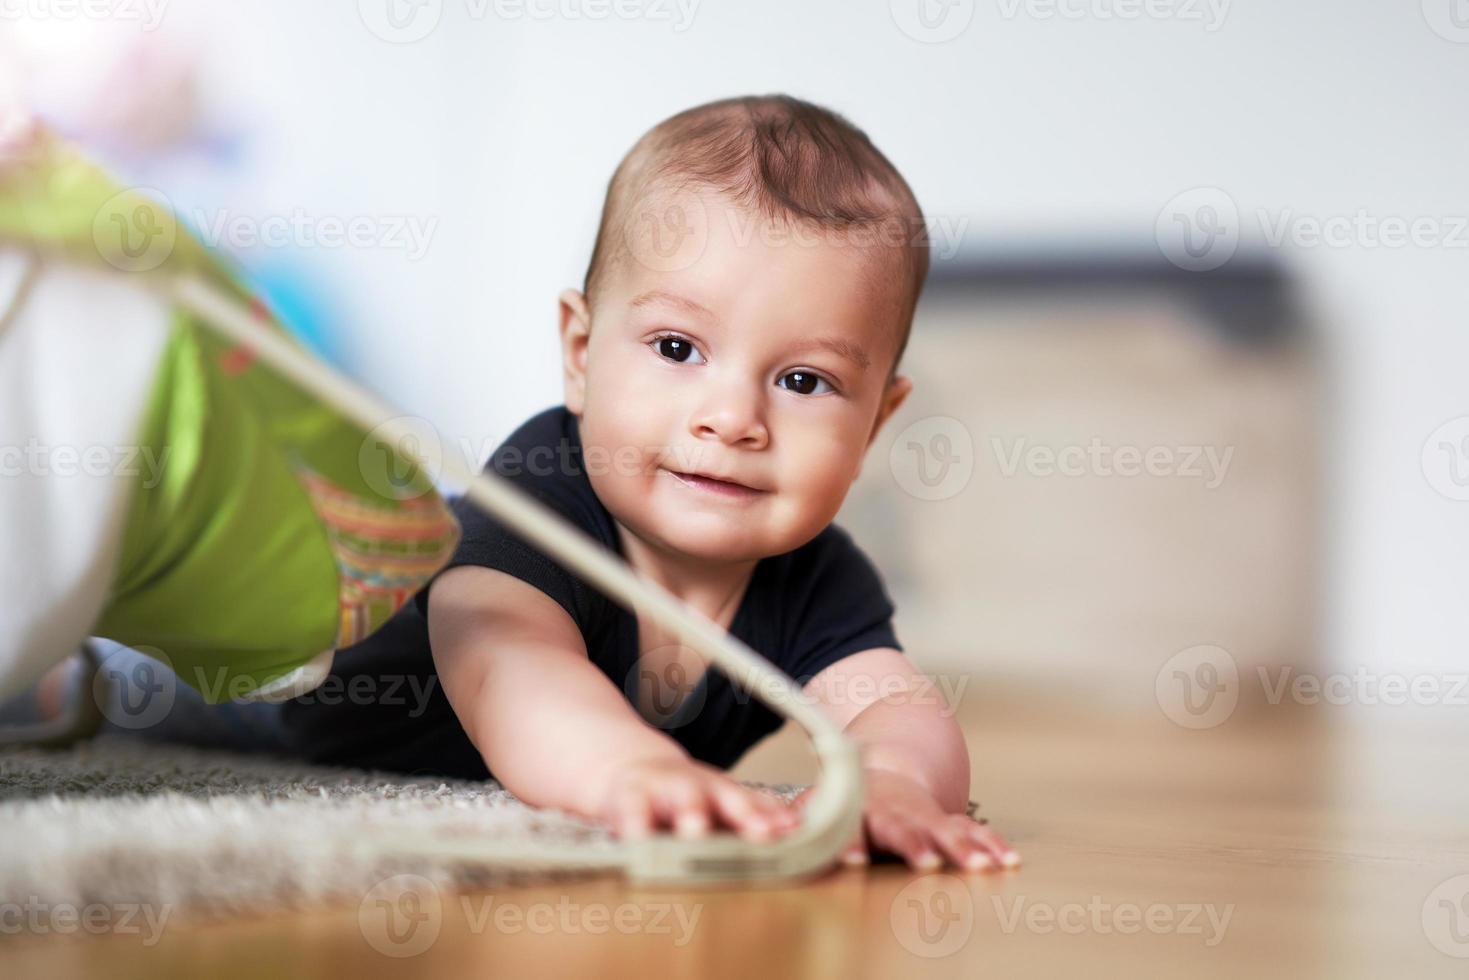 Cute smiling baby boy crawling on floor in living room photo